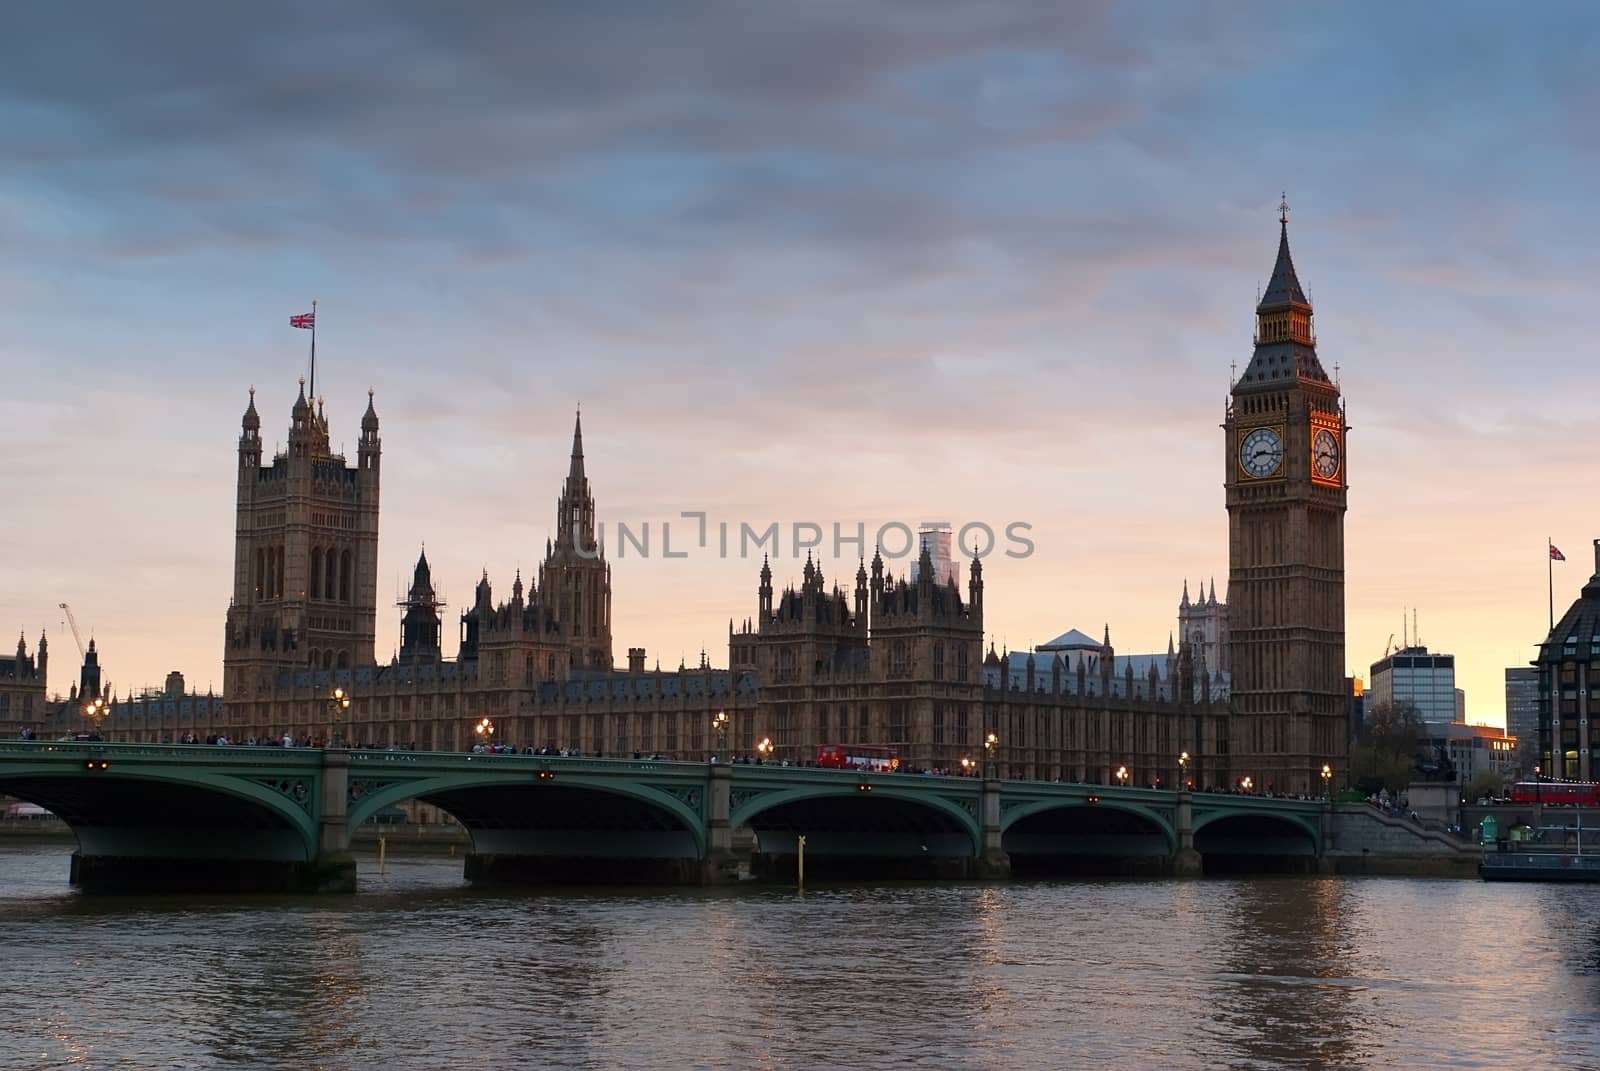 Famous Big Ben in the evening with bridge, London, England by mitakag